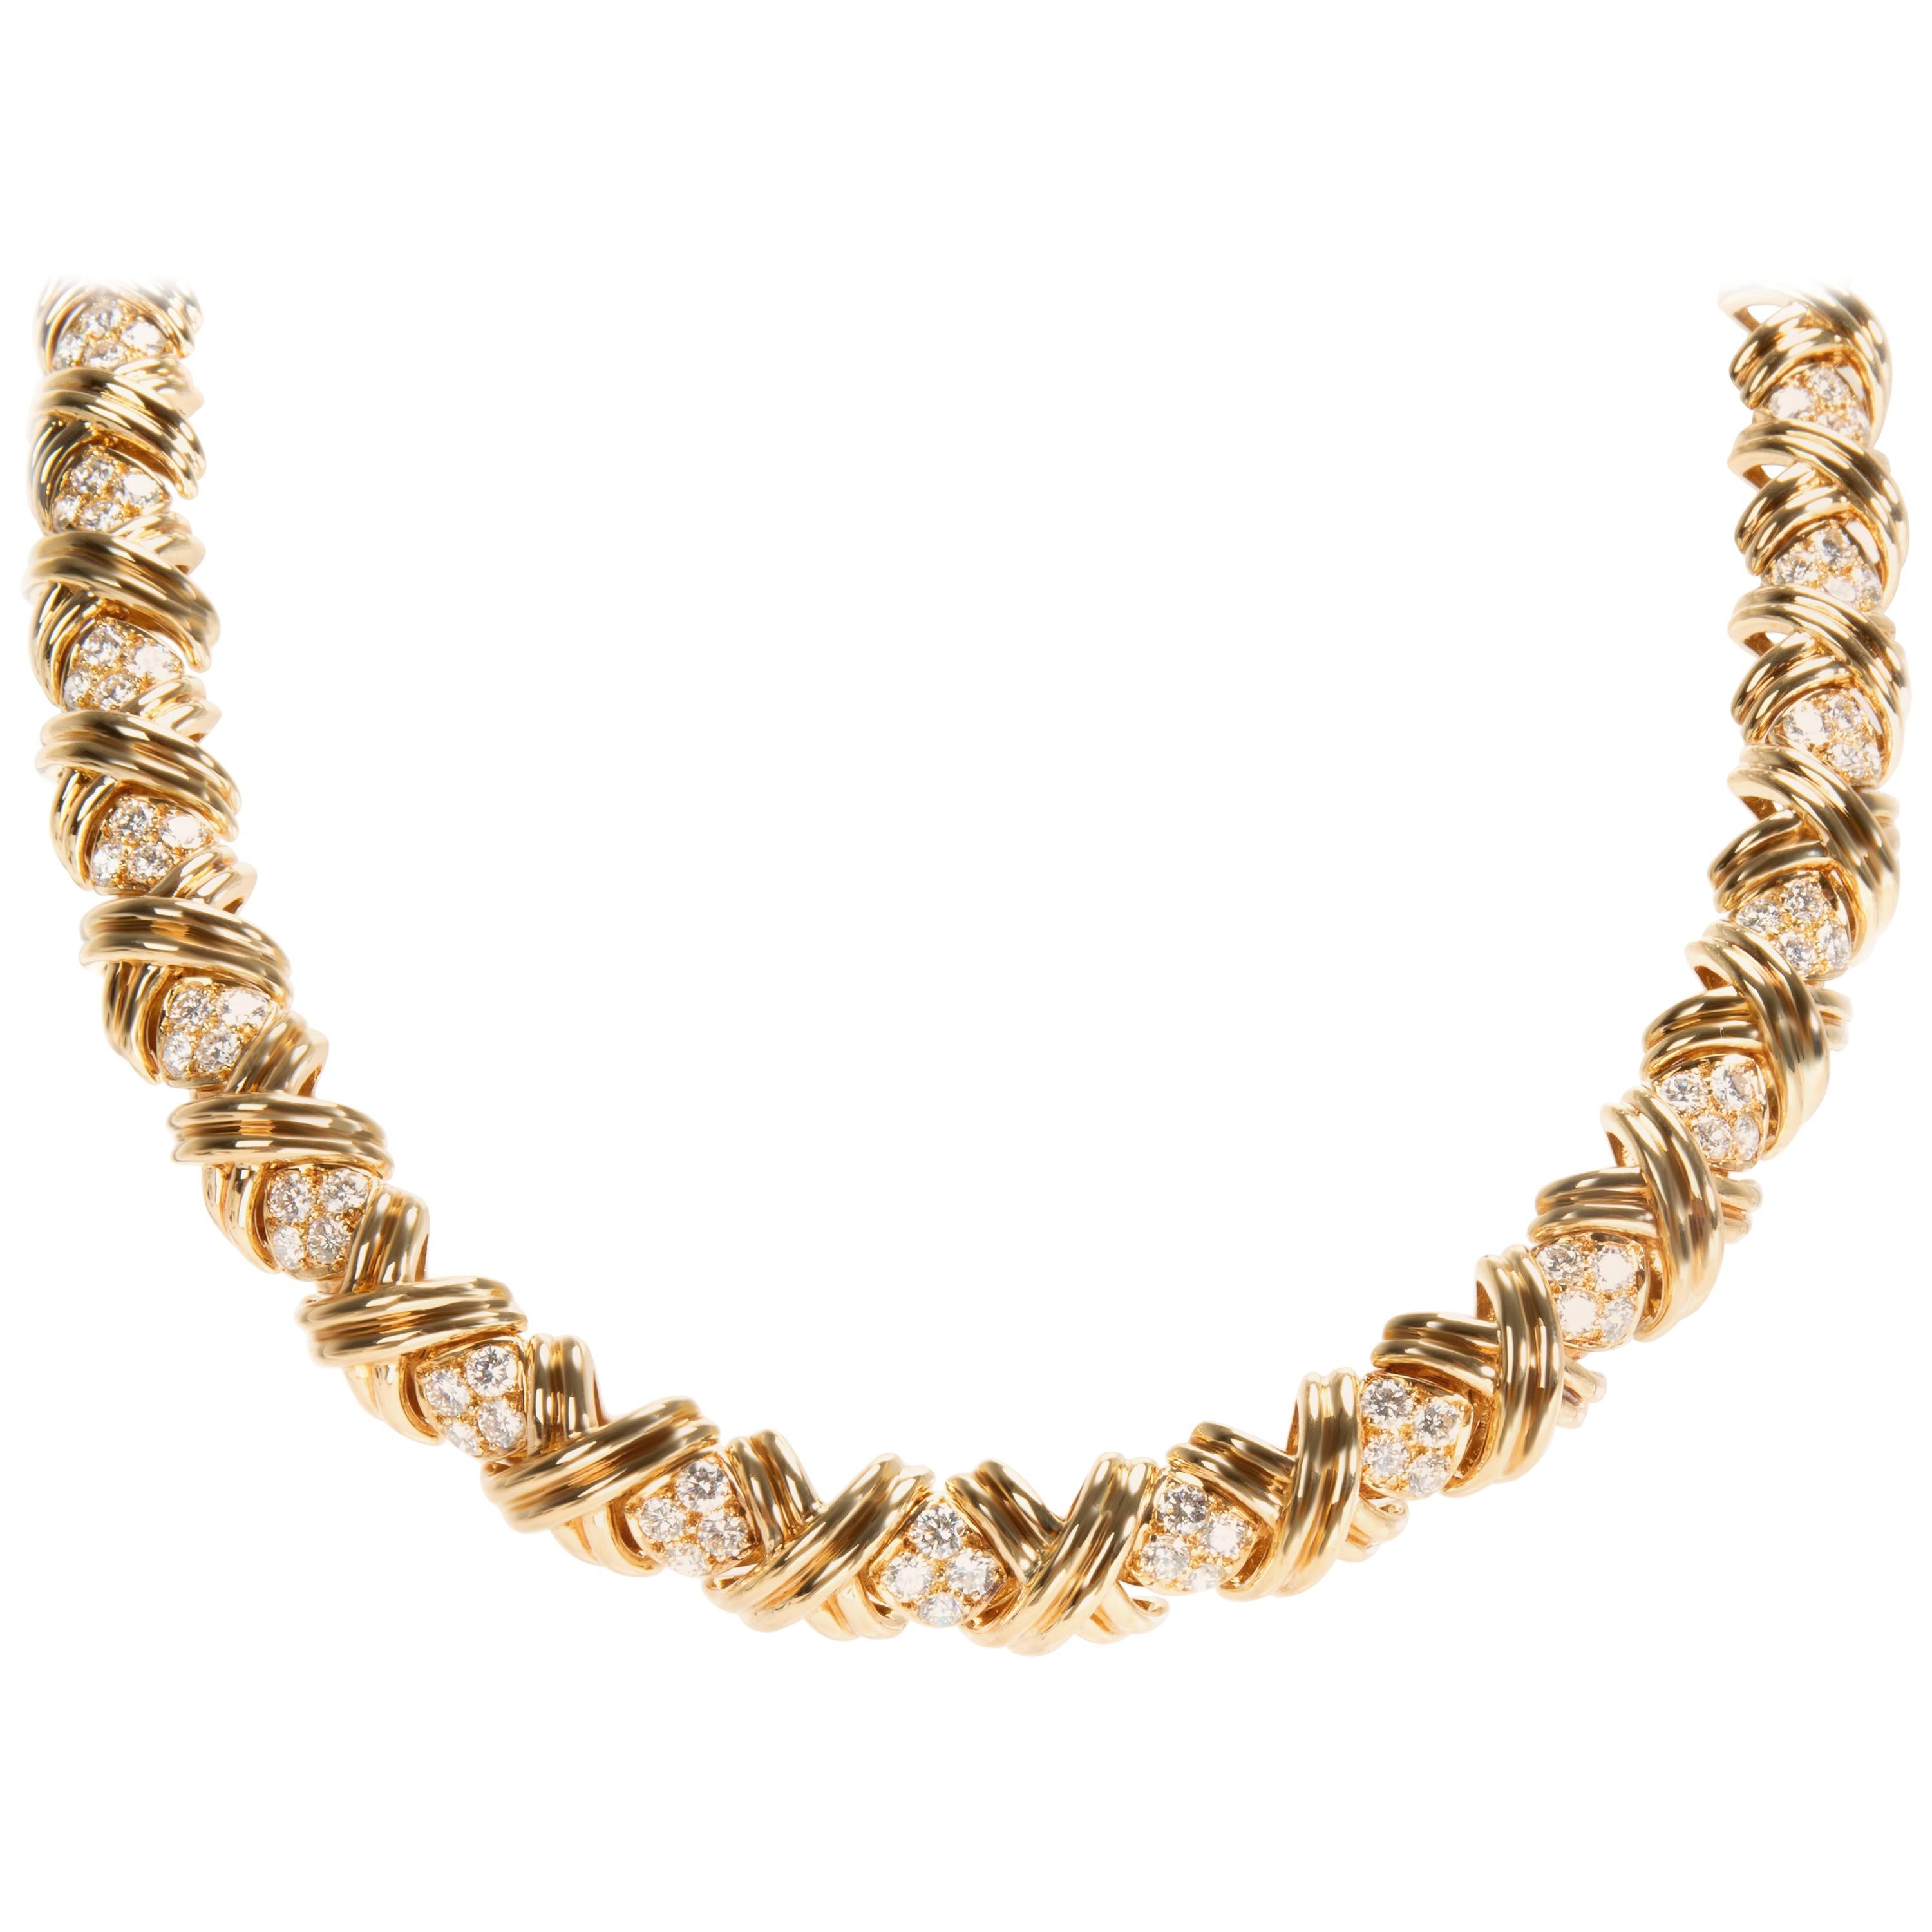 Tiffany & Co. X-Collection Diamond Necklace in 18 Karat Yellow Gold 8.28 Carat